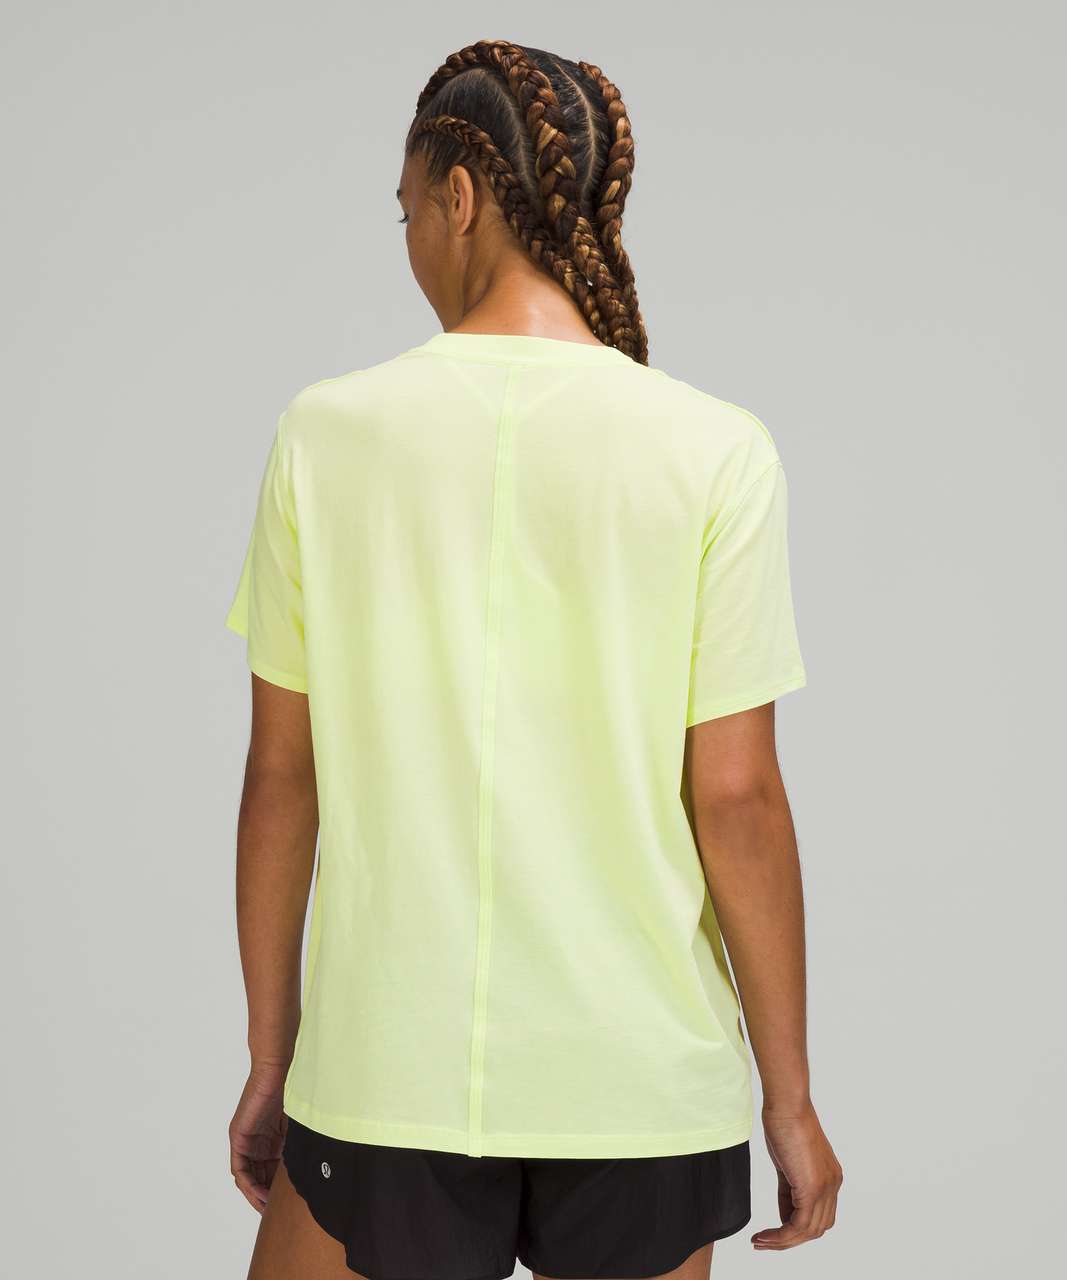 Lululemon All Yours Tee - Crispin Green